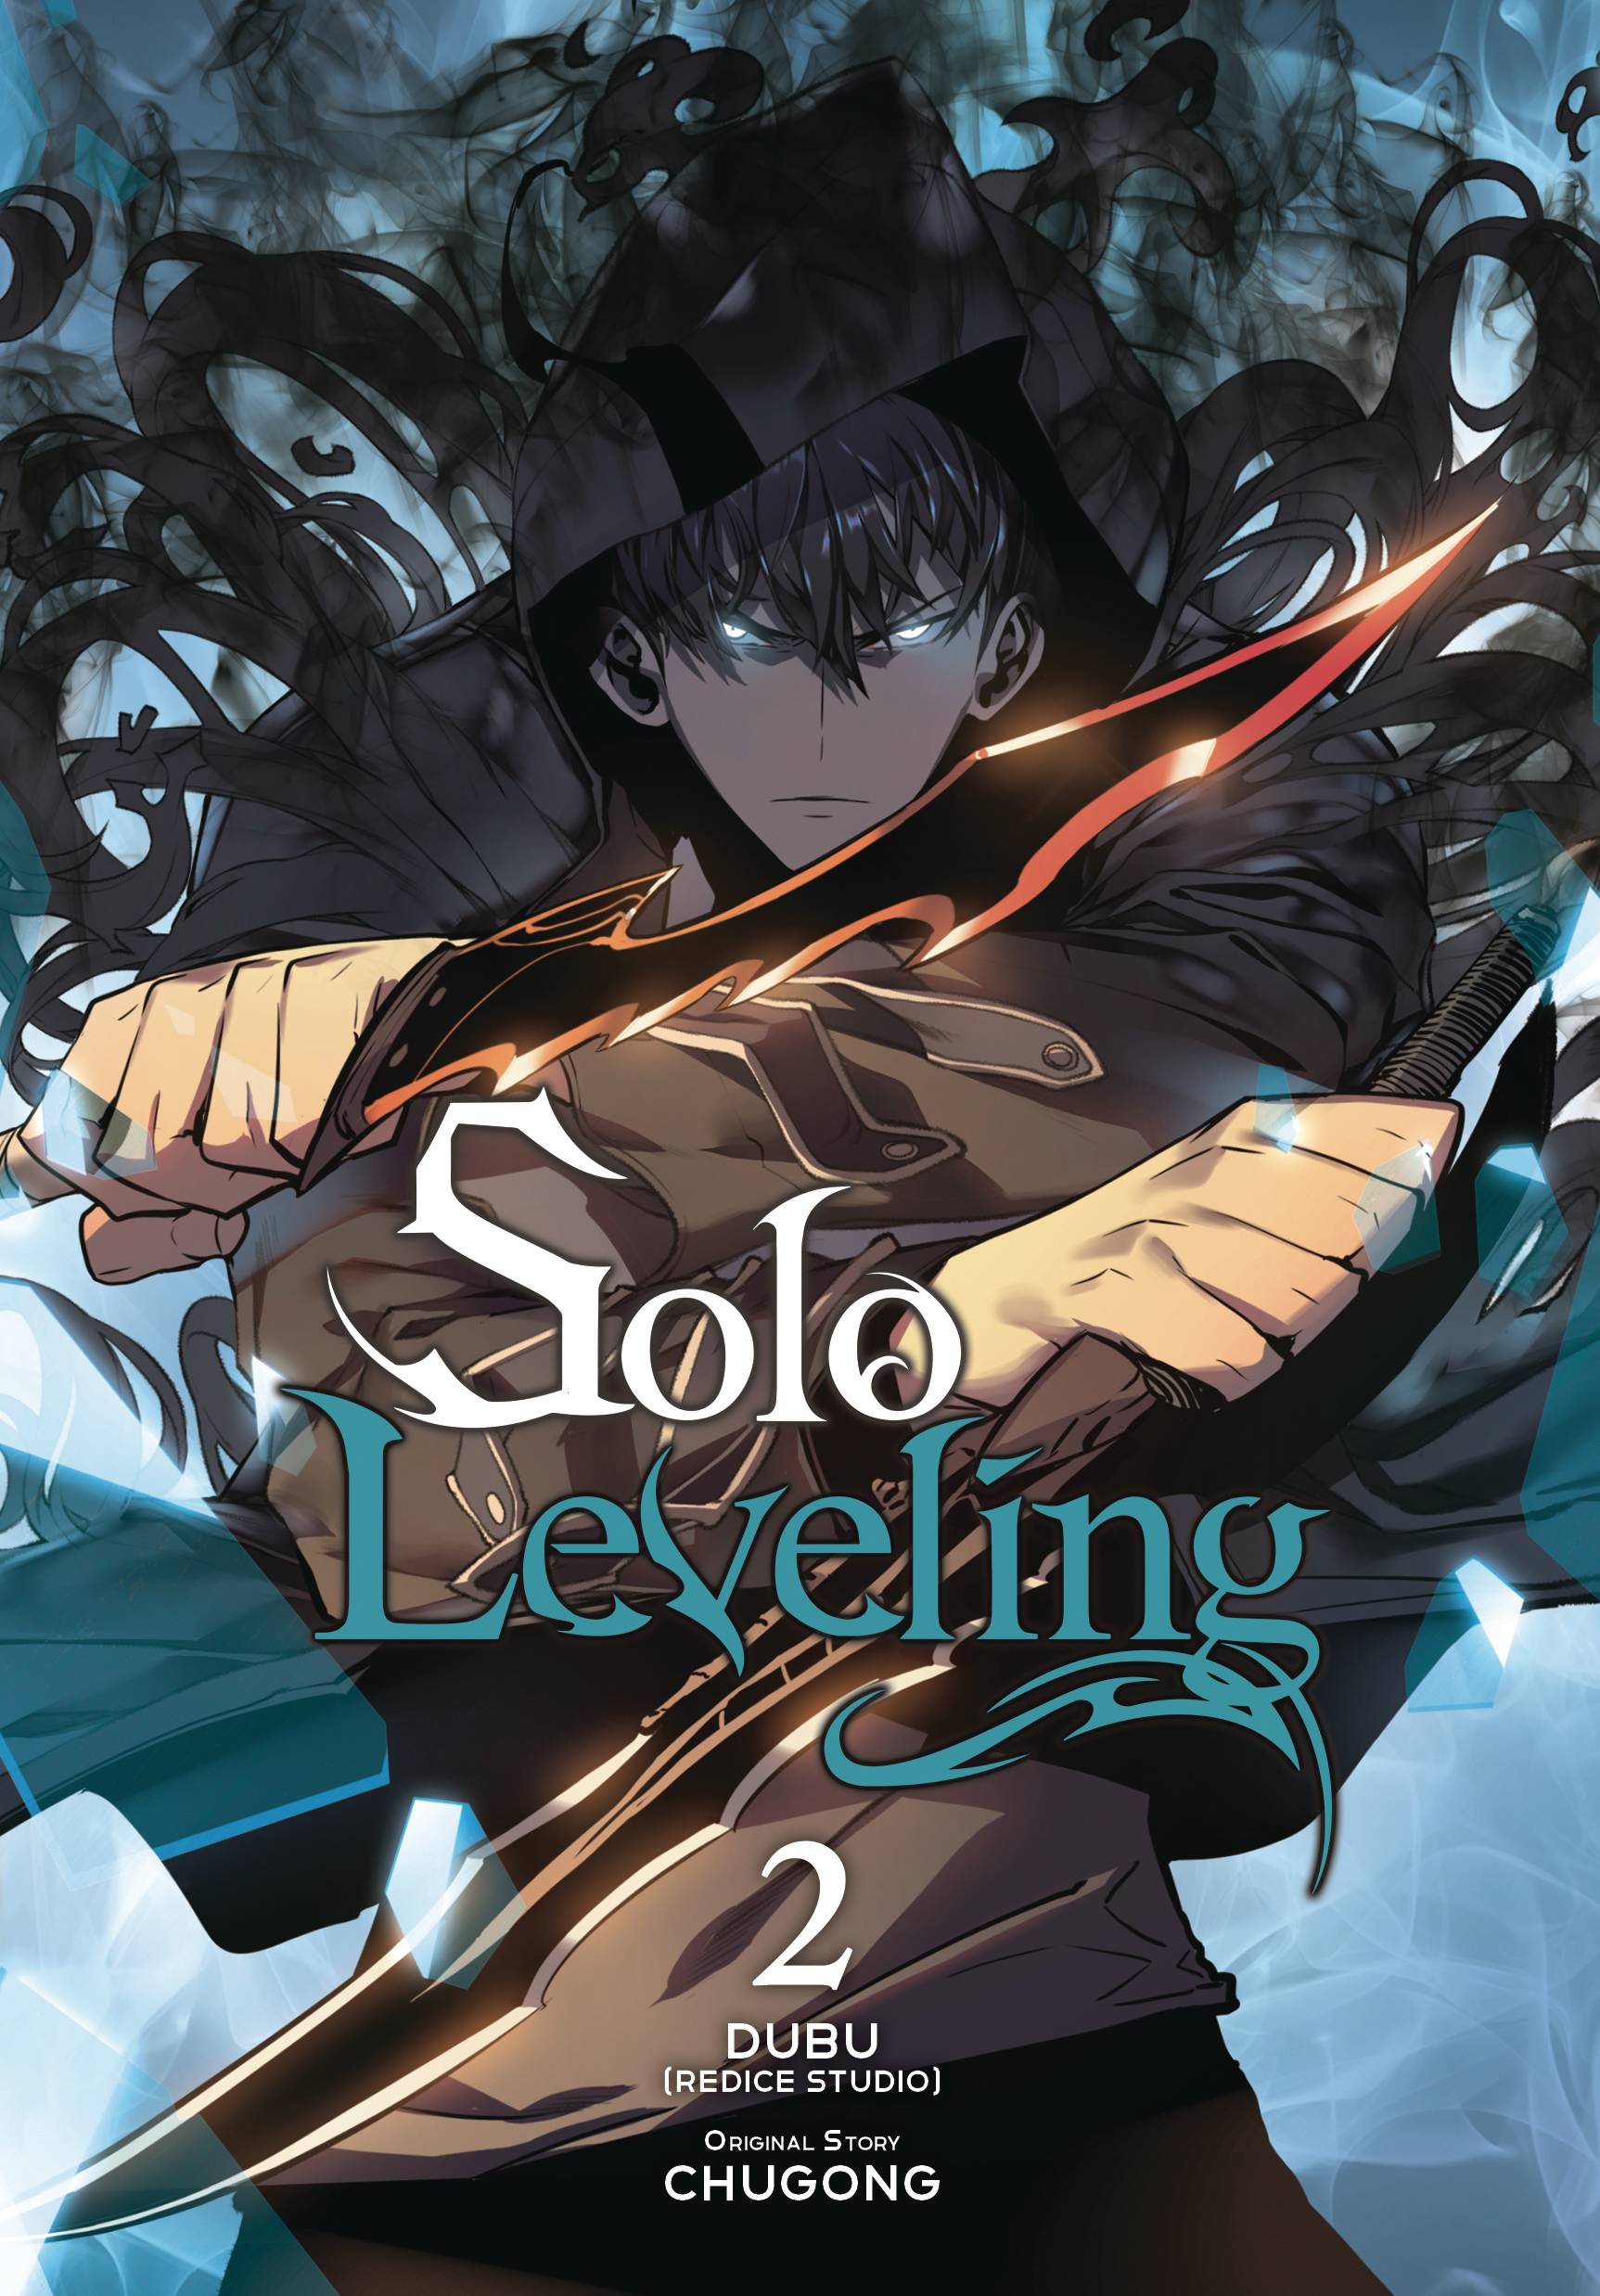 Solo Leveling vol 2